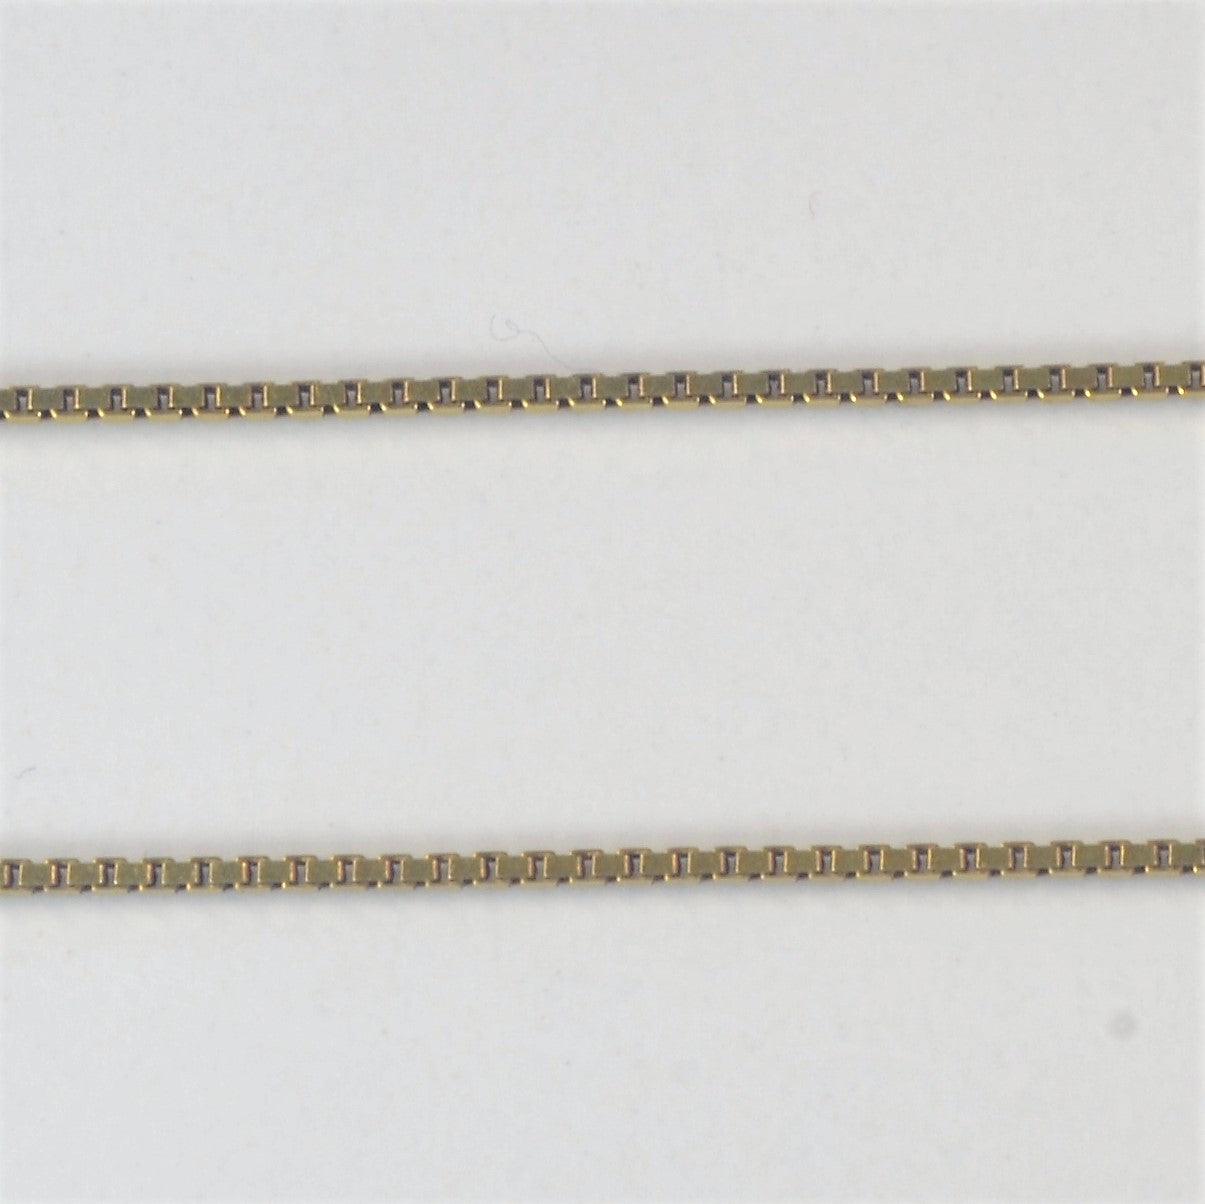 Diamond Channel Bypass Necklace | 0.45ctw | 16